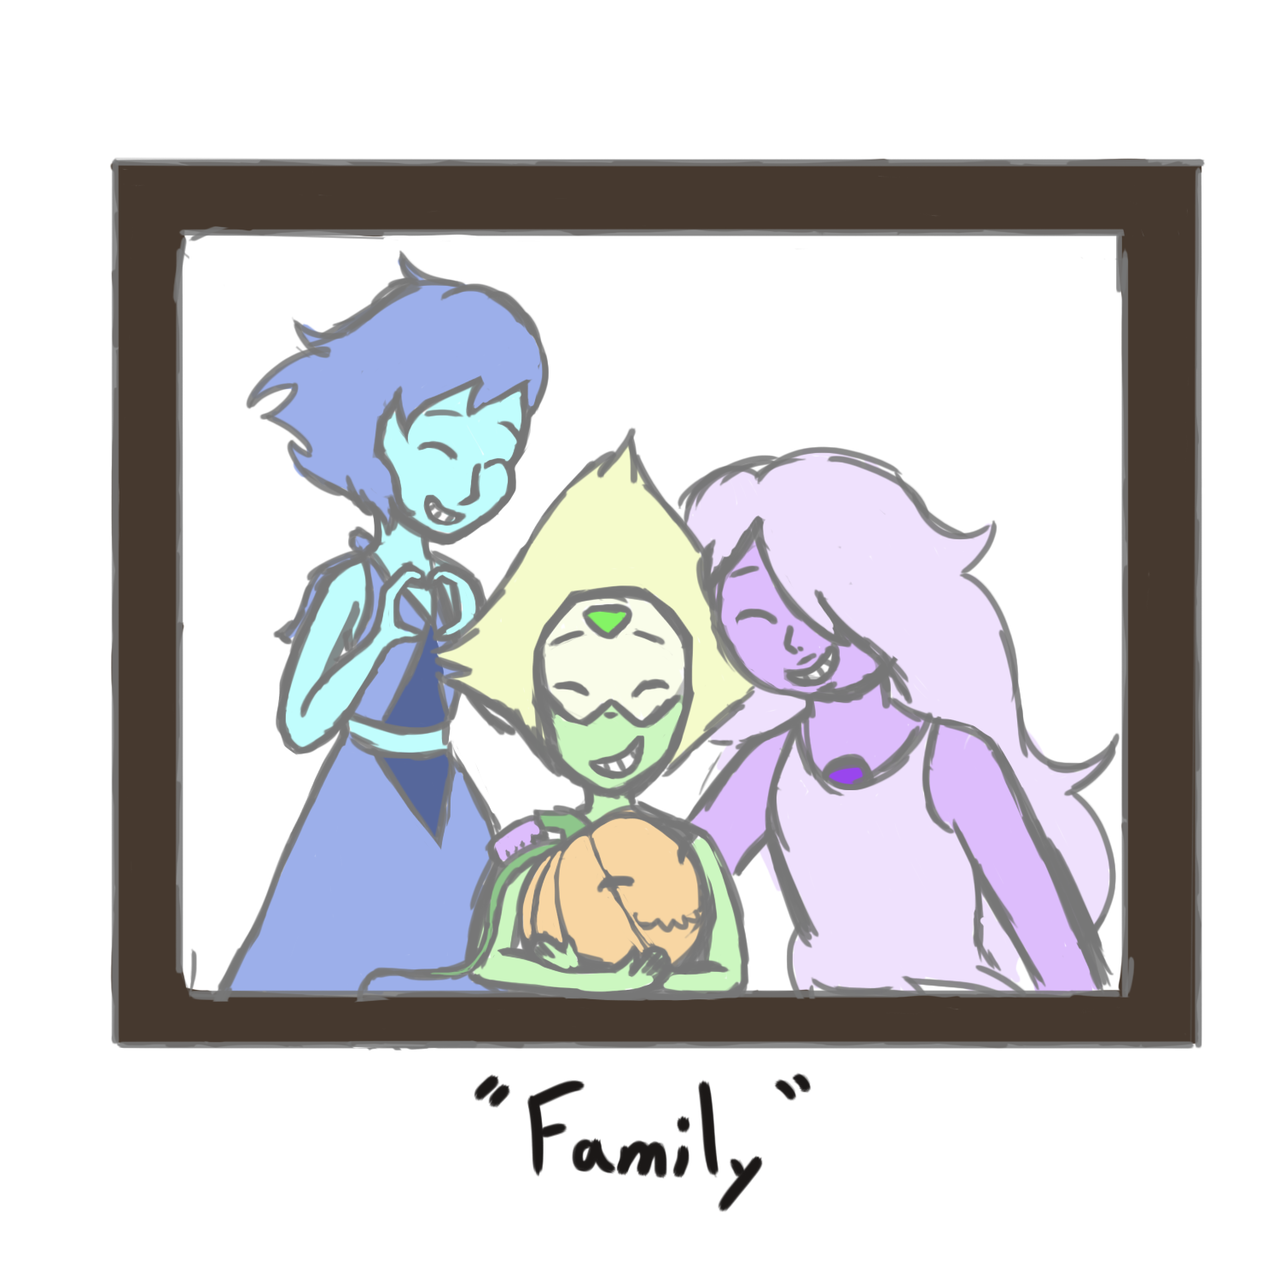 @lapamedotweek, day 1: “Family” Here’s a family photo! The drawings I make will probably be simple and pastel so I have time to draw other things, but I’m really proud of this one!